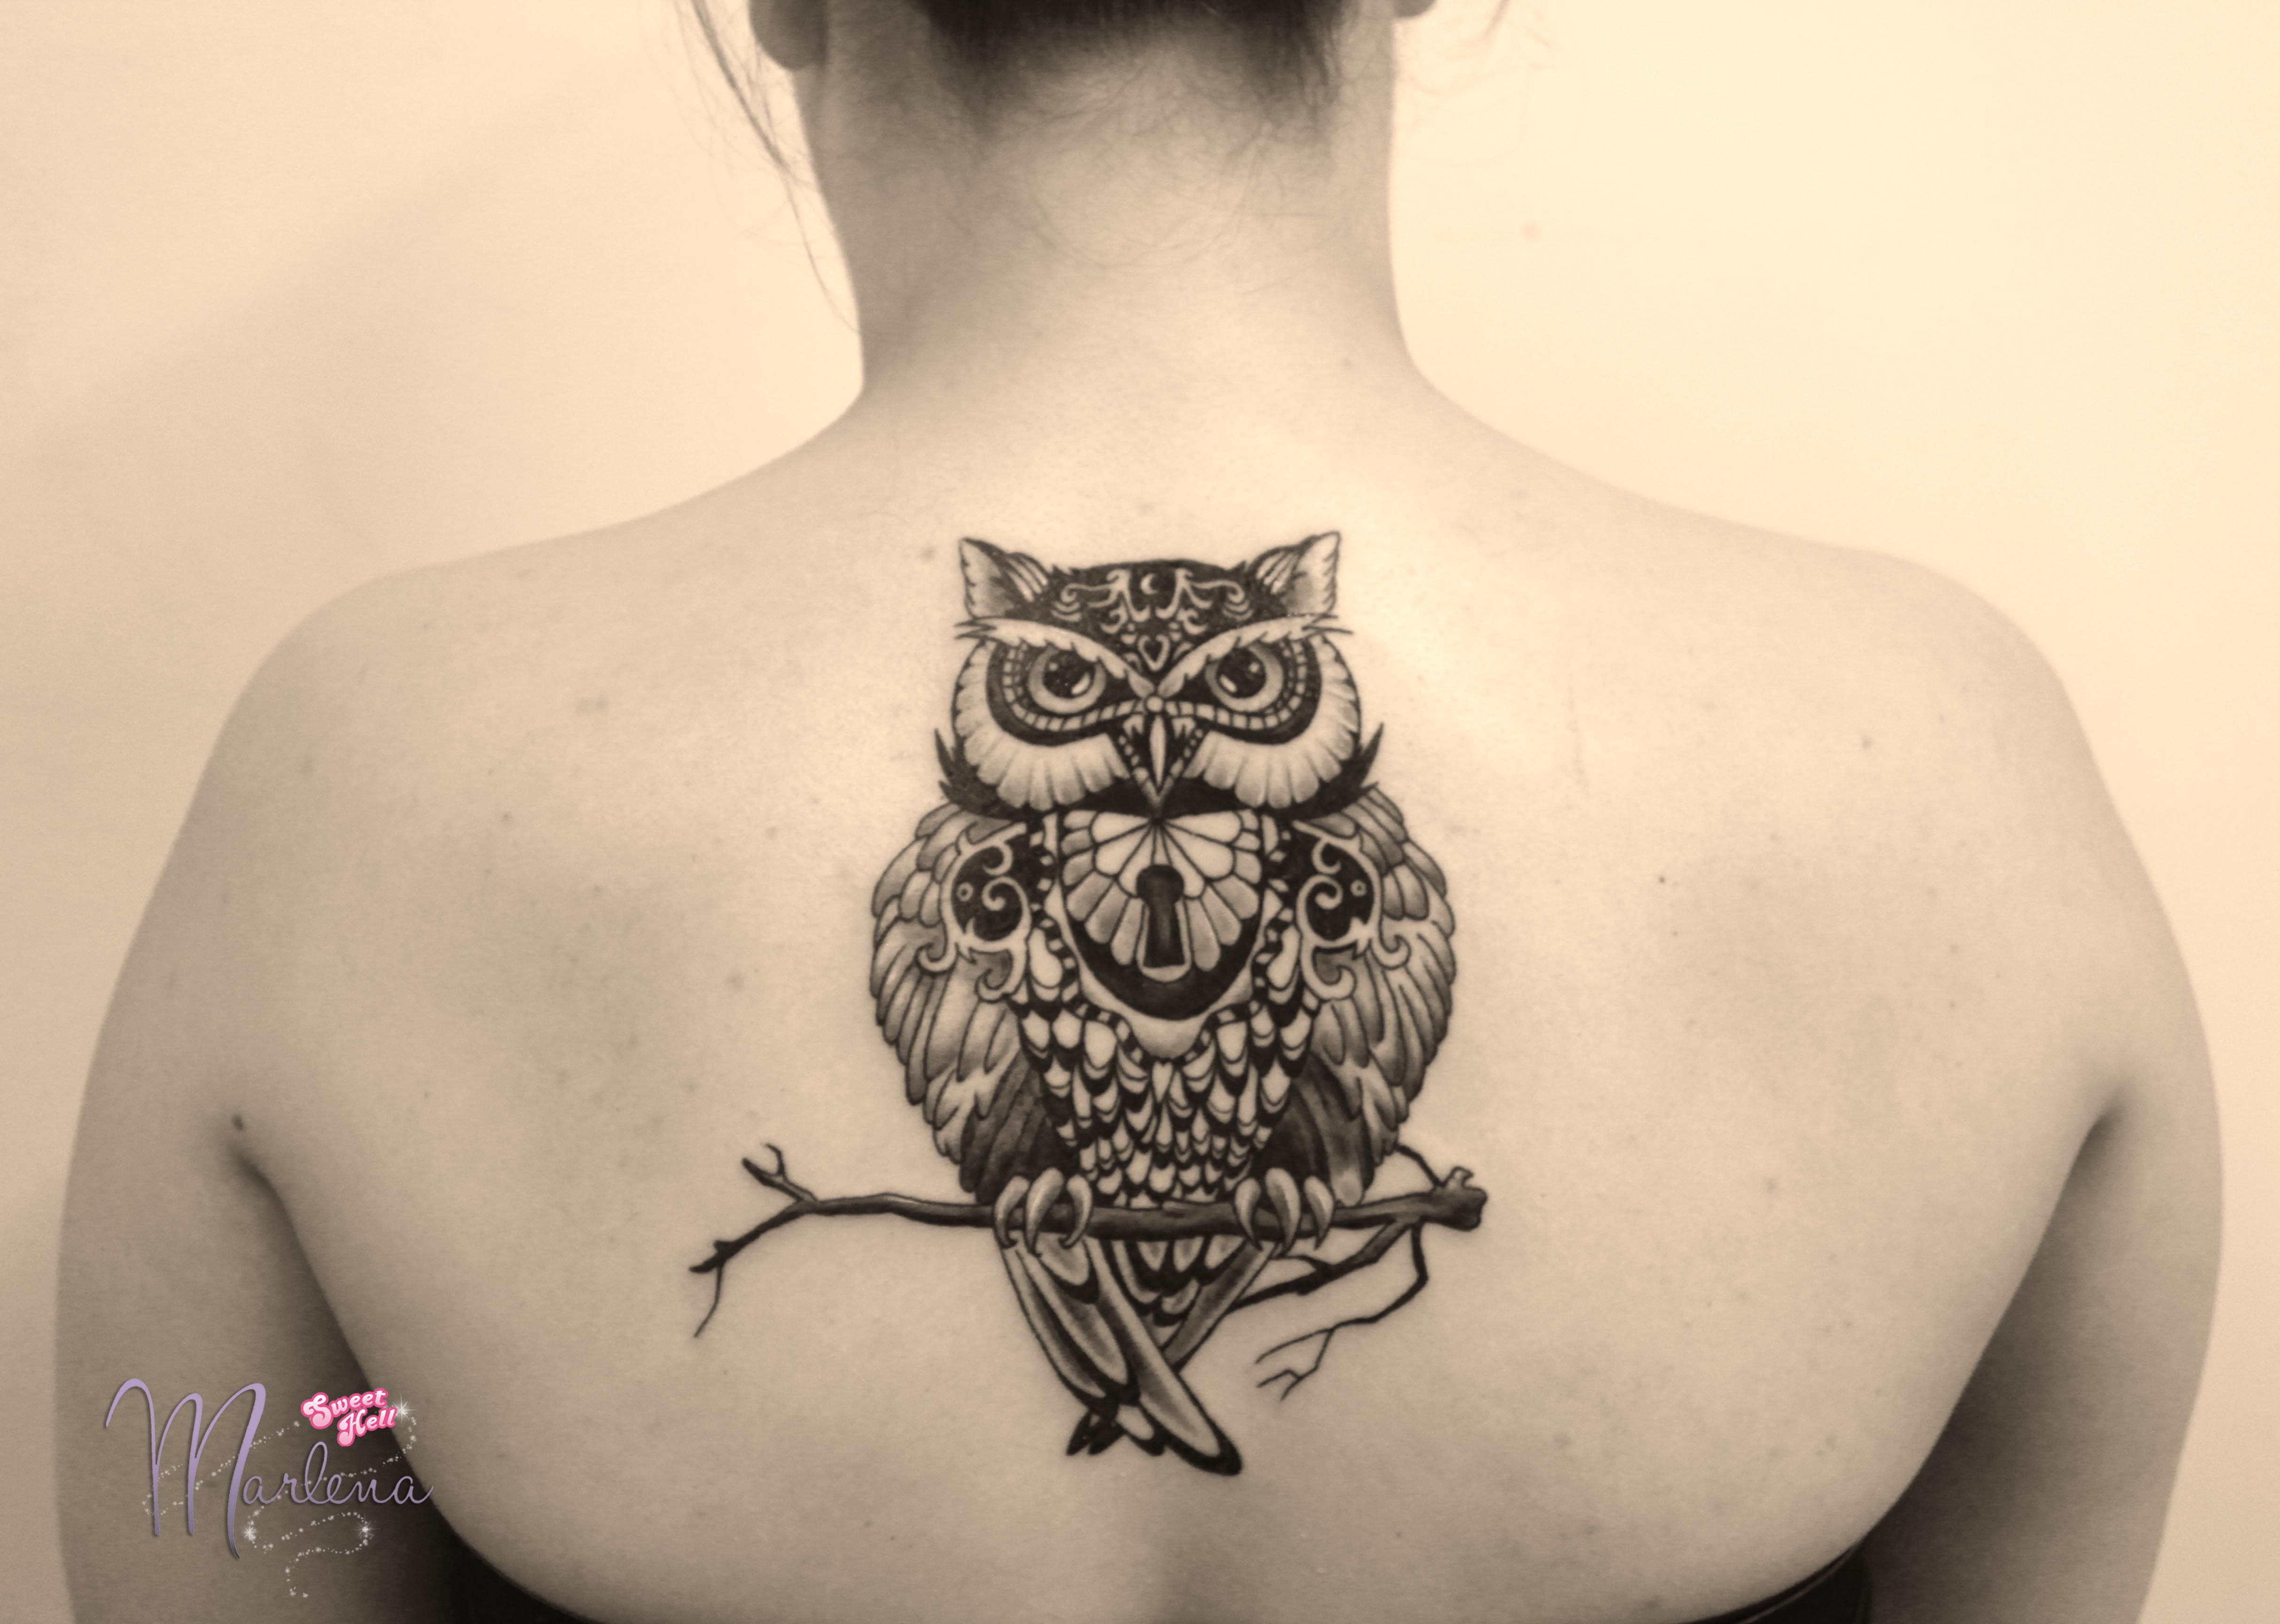 Owl Tattoo On A Back Between Shoulder Blades Black Ornamental Line within dimensions 4852 X 3456